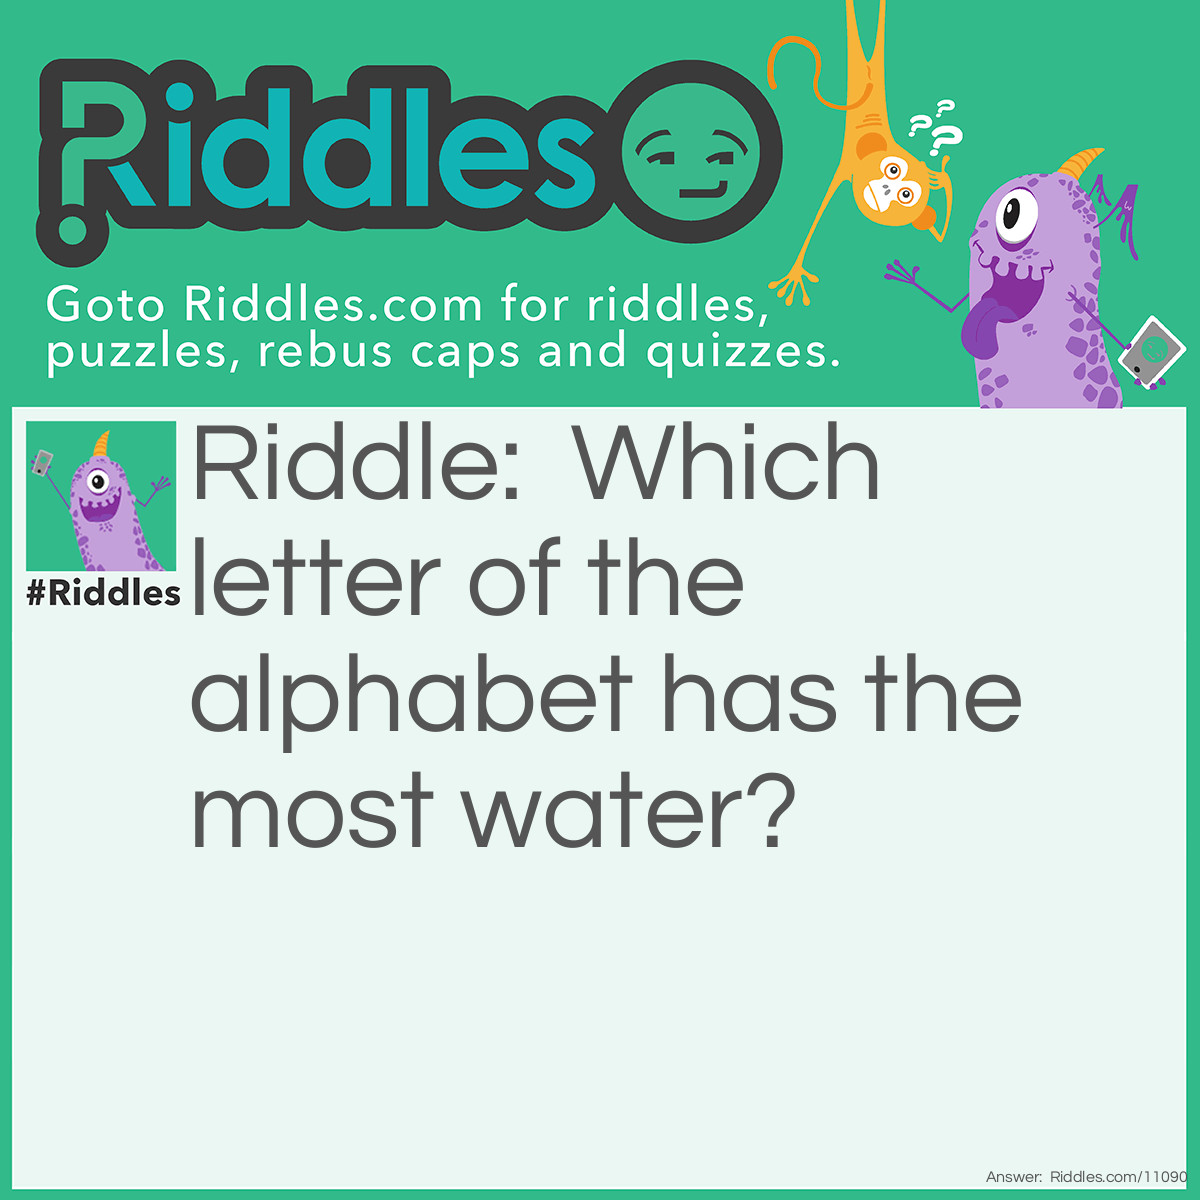 Riddle: Which letter of the alphabet has the most water? Answer: The “C.”